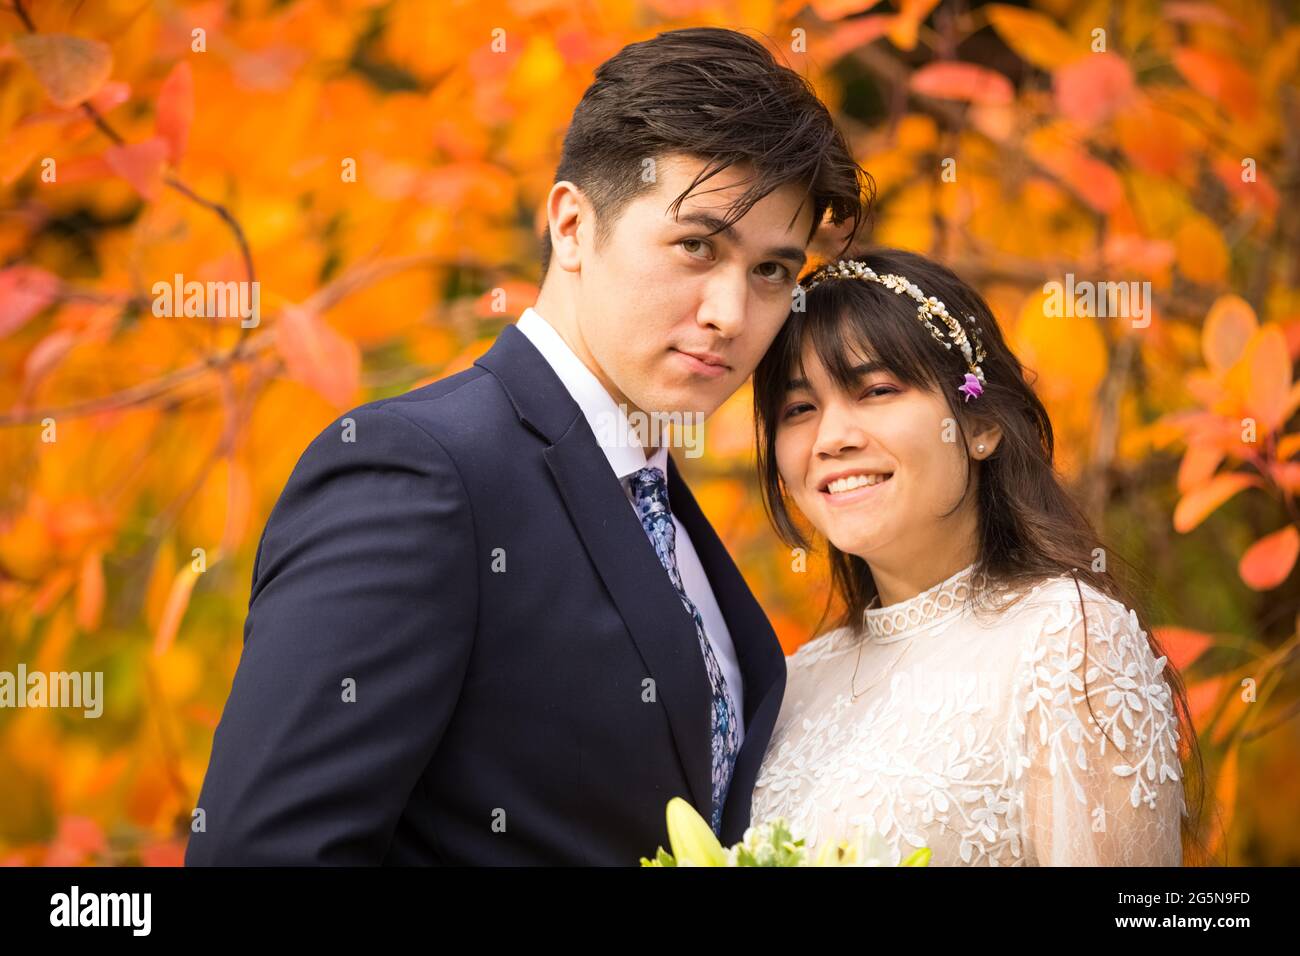 Biracial bride and groom together outdoors after autumn wedding with bright colorful orange leaves in background Stock Photo